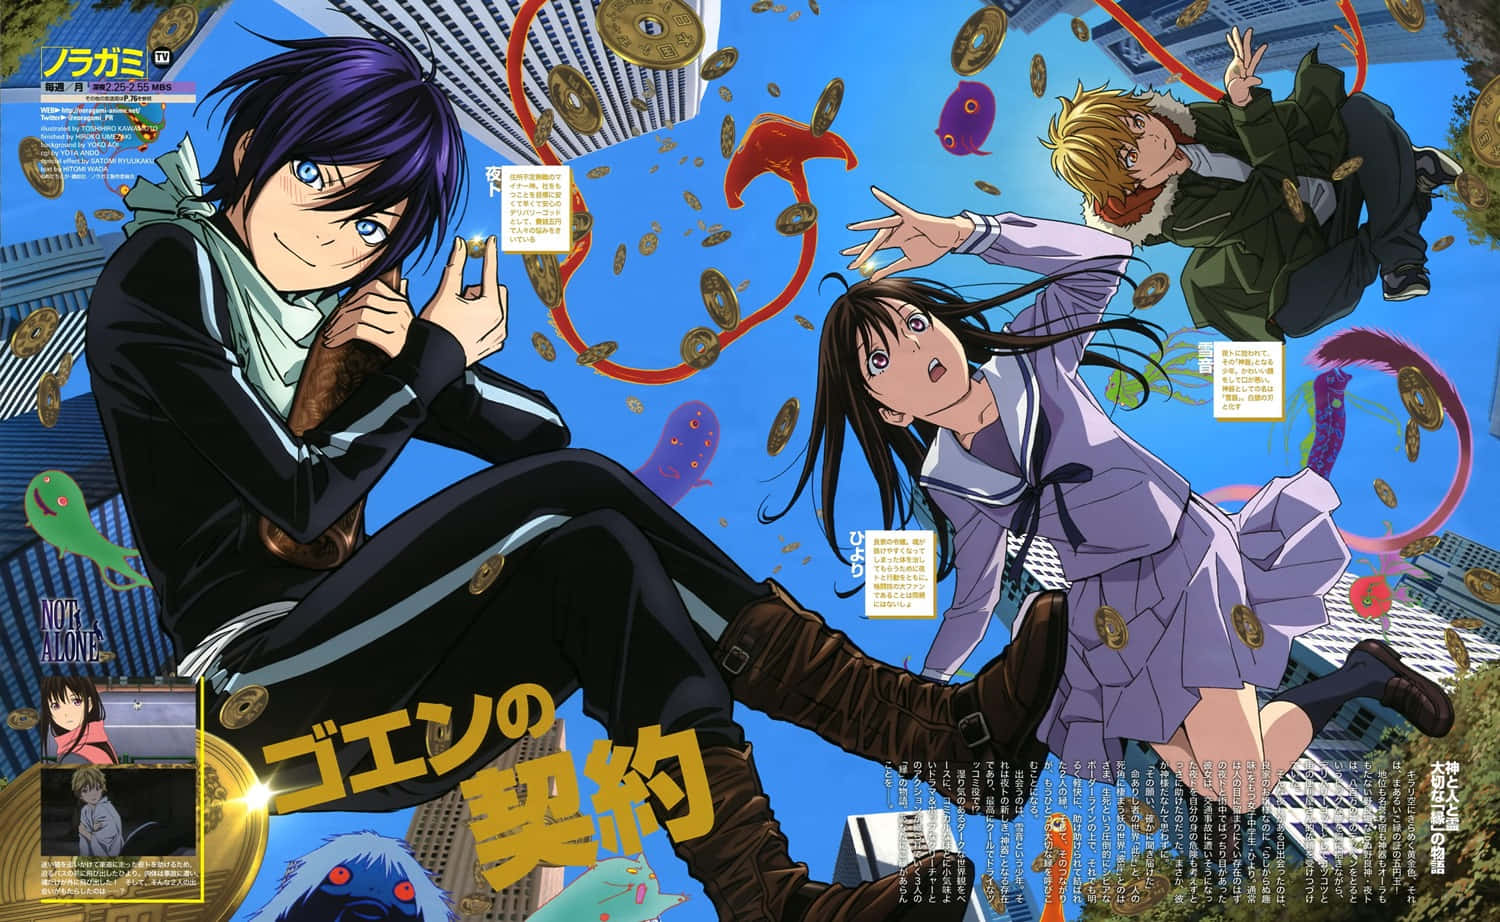 A Poster For An Anime With Two People In The Air